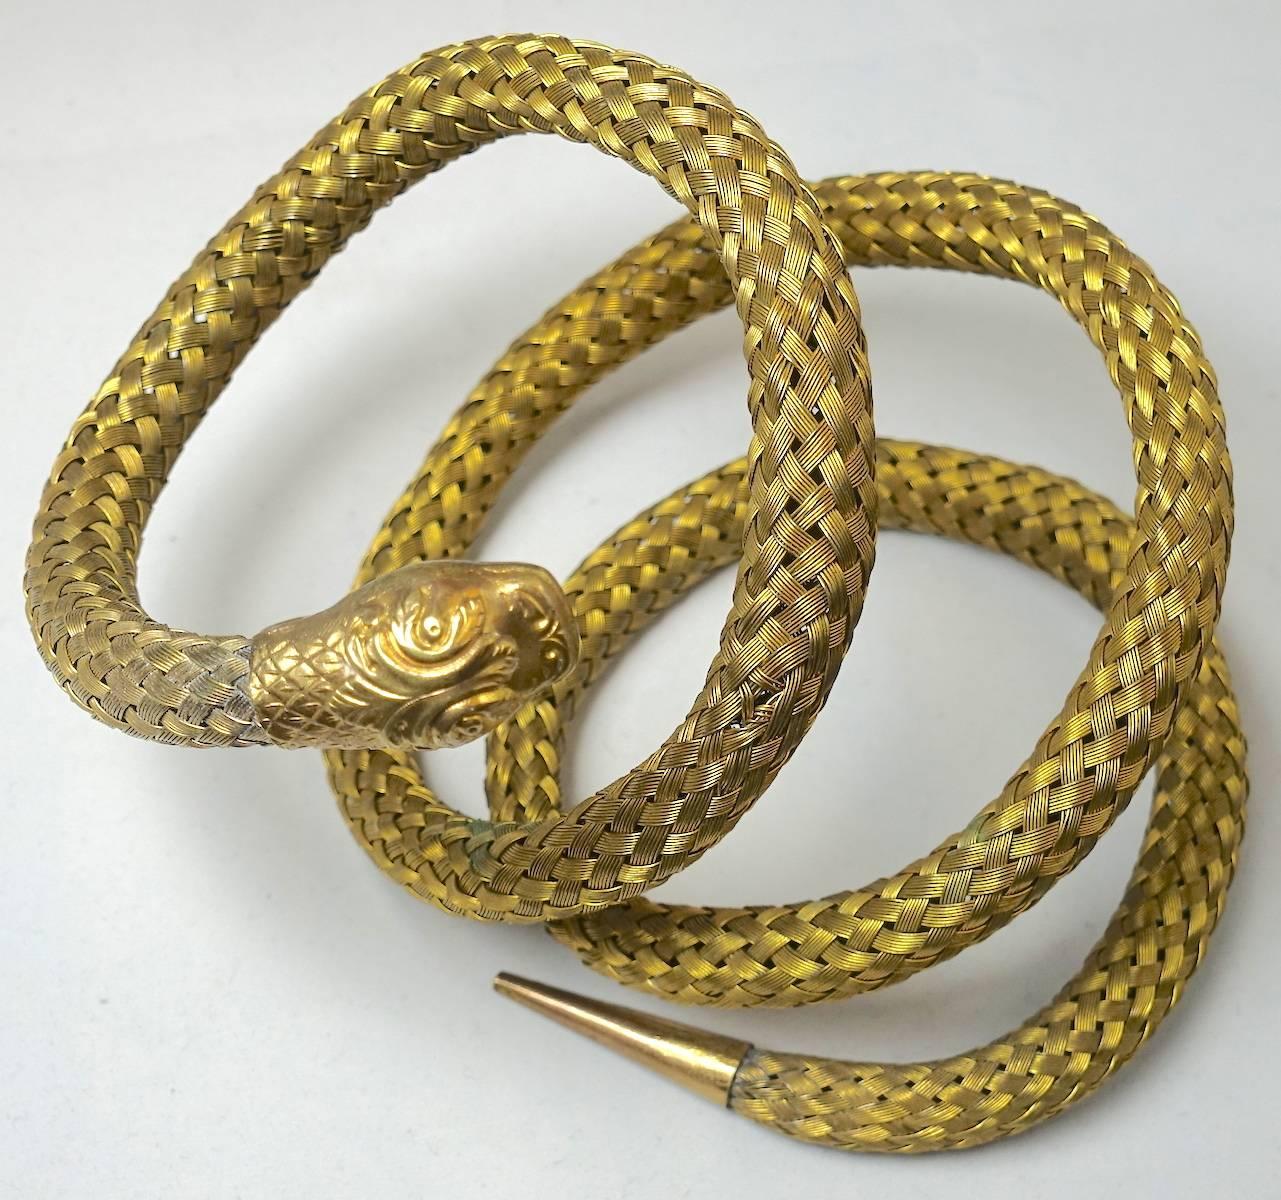 I love this serpent coil arm bracelet. It is made with a woven wire basket design. The head has great detail and life-like scales. This arm bracelet was made in a brass tone setting and measures 4-1/2” high and 1/2” wide. but it can be stretched to